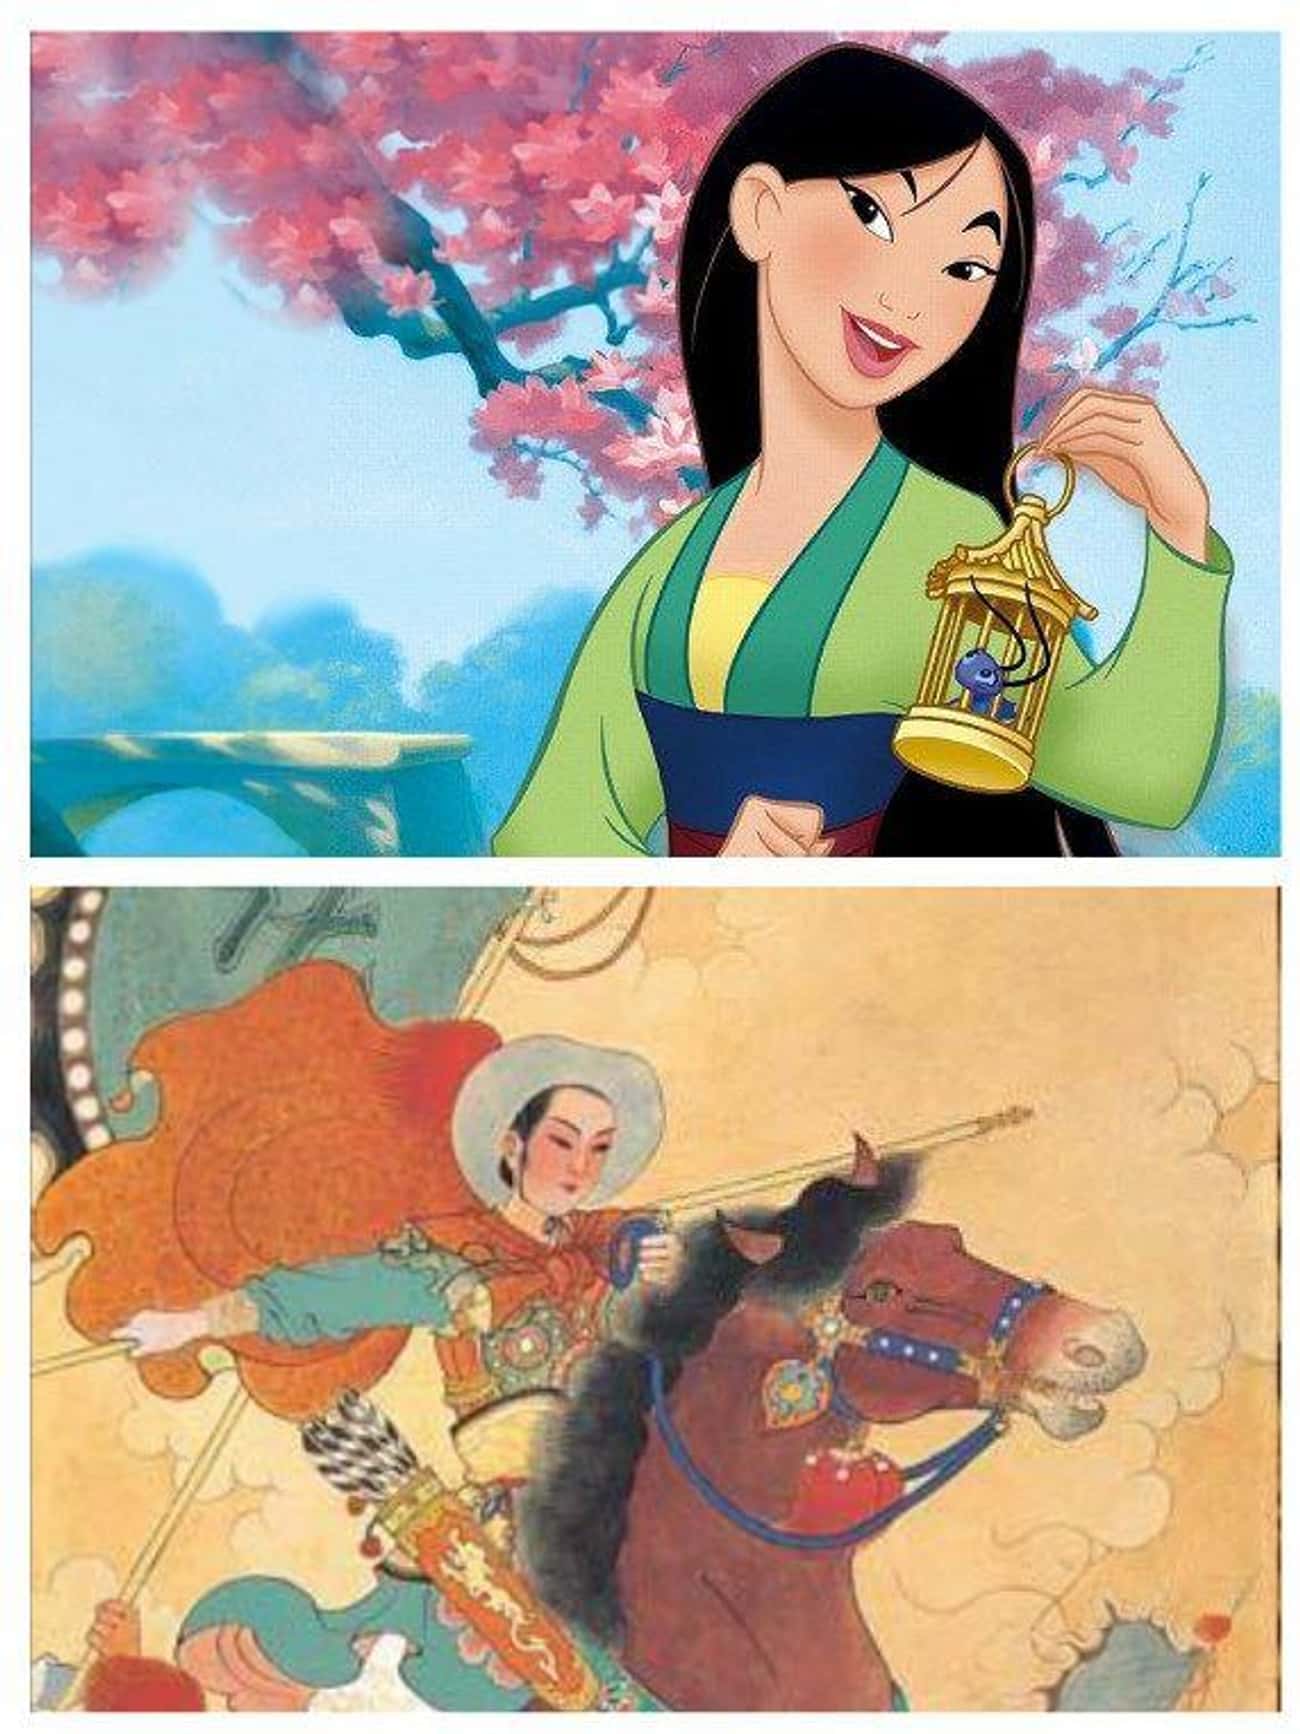 Hua Mulan, Disguised as Her Father, Became a Kung-Fu Master